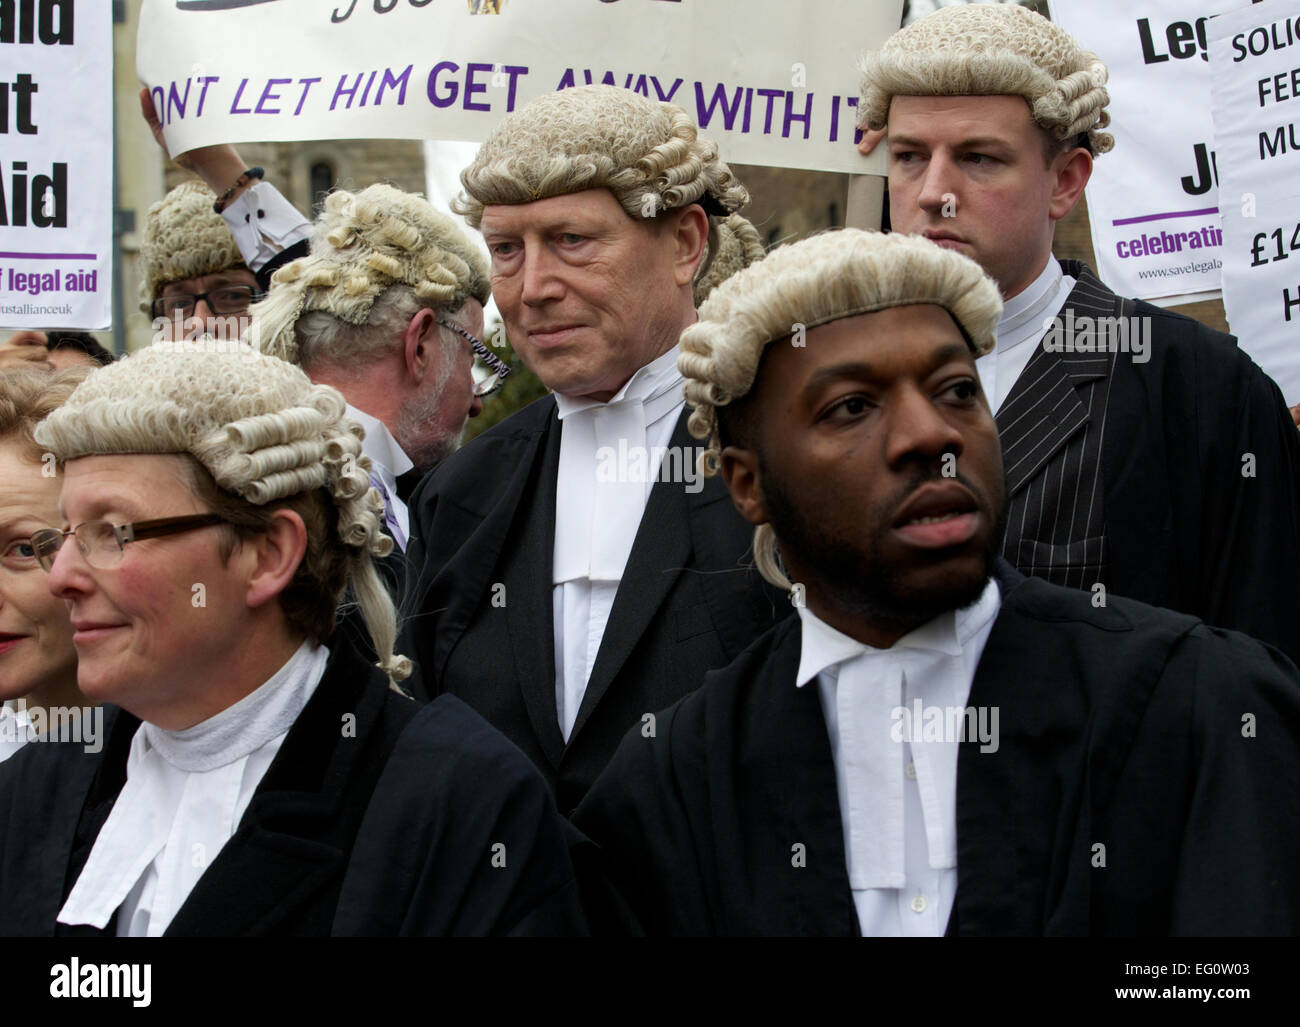 UNITED KINGDOM, London : Members of the British Justice system hold placard in protest of the cuts to the legal aid budget during a protest outside The Houses of Parliament in London on March 7, 2014. Stock Photo